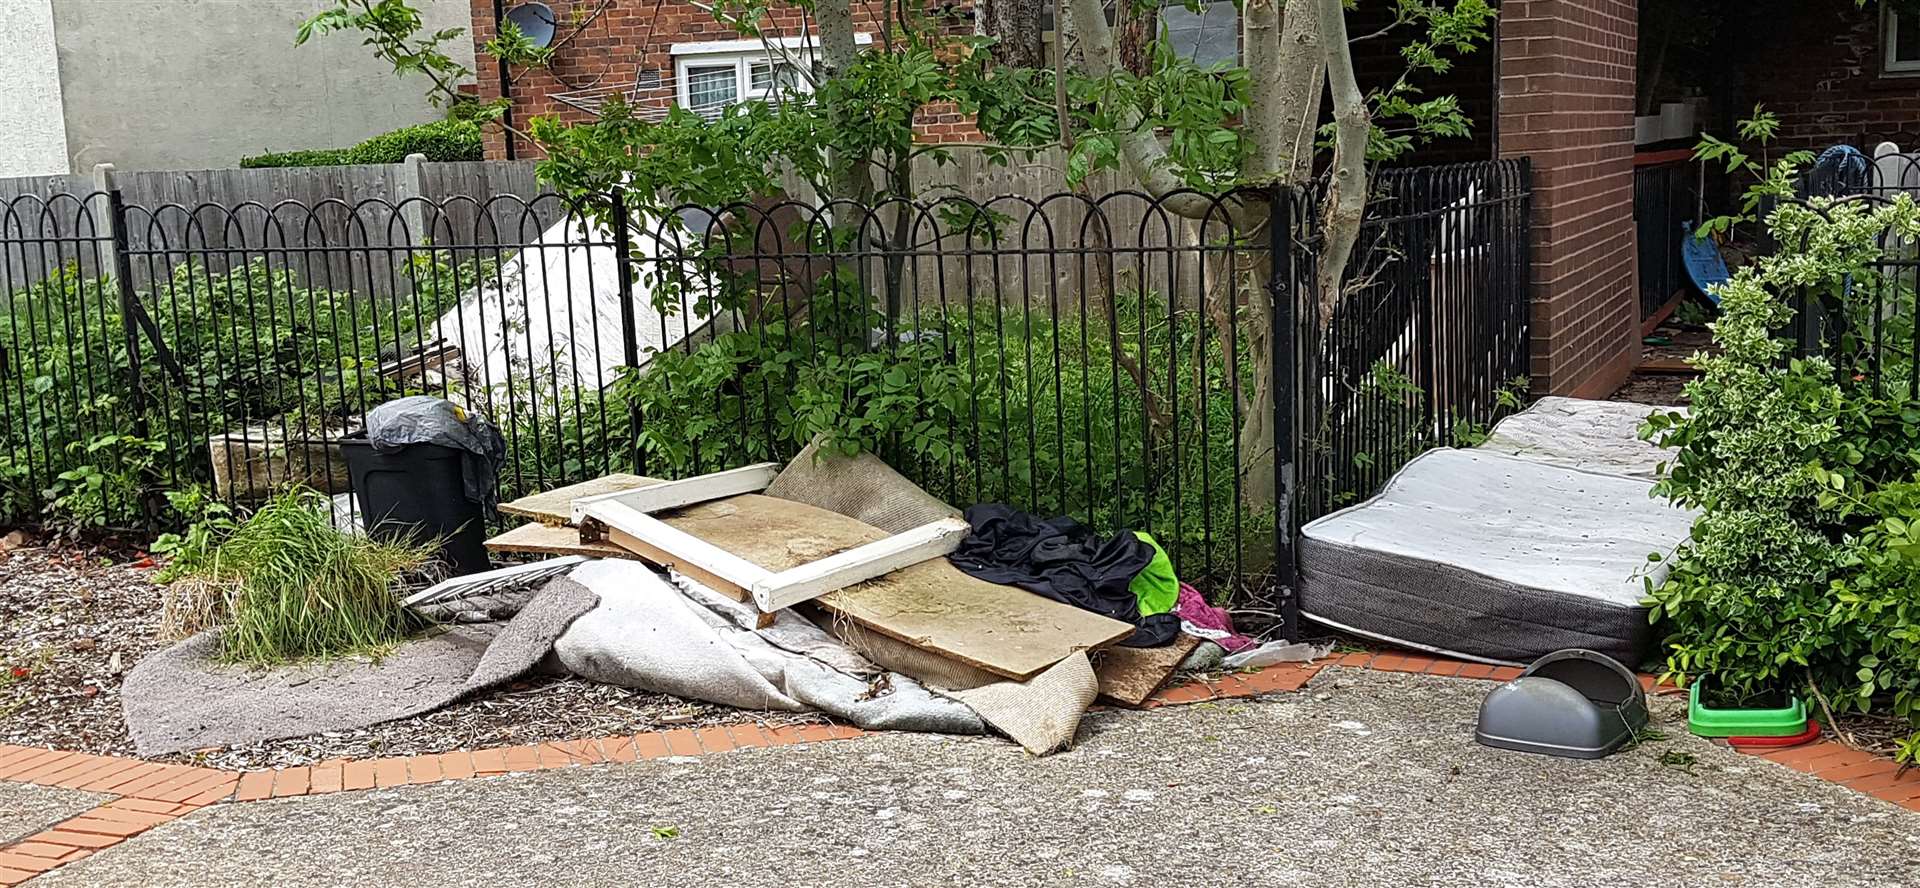 Some old mattresses had be left outside